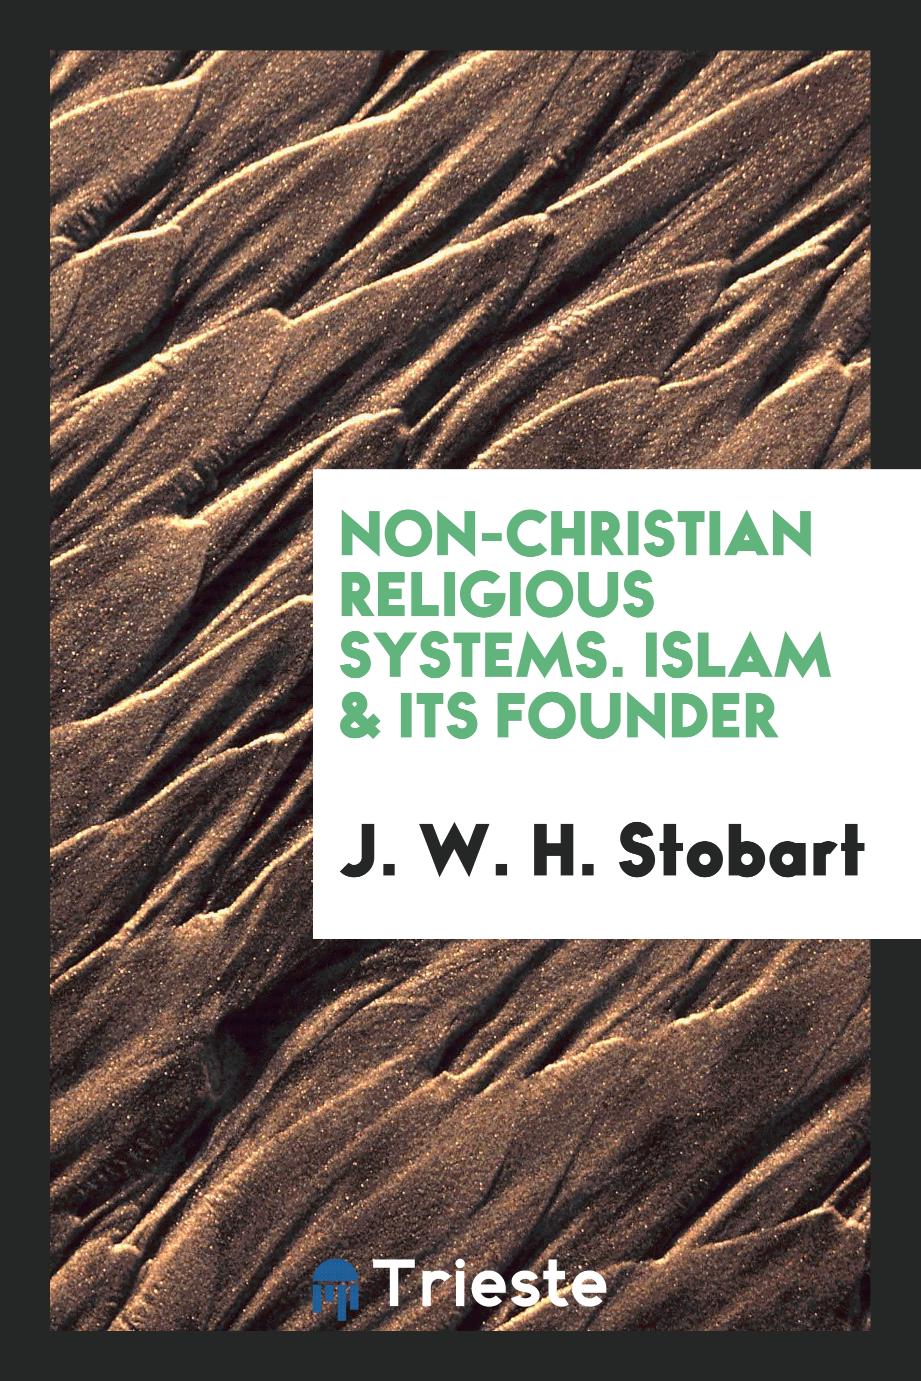 Non-Christian Religious Systems. Islam & Its Founder